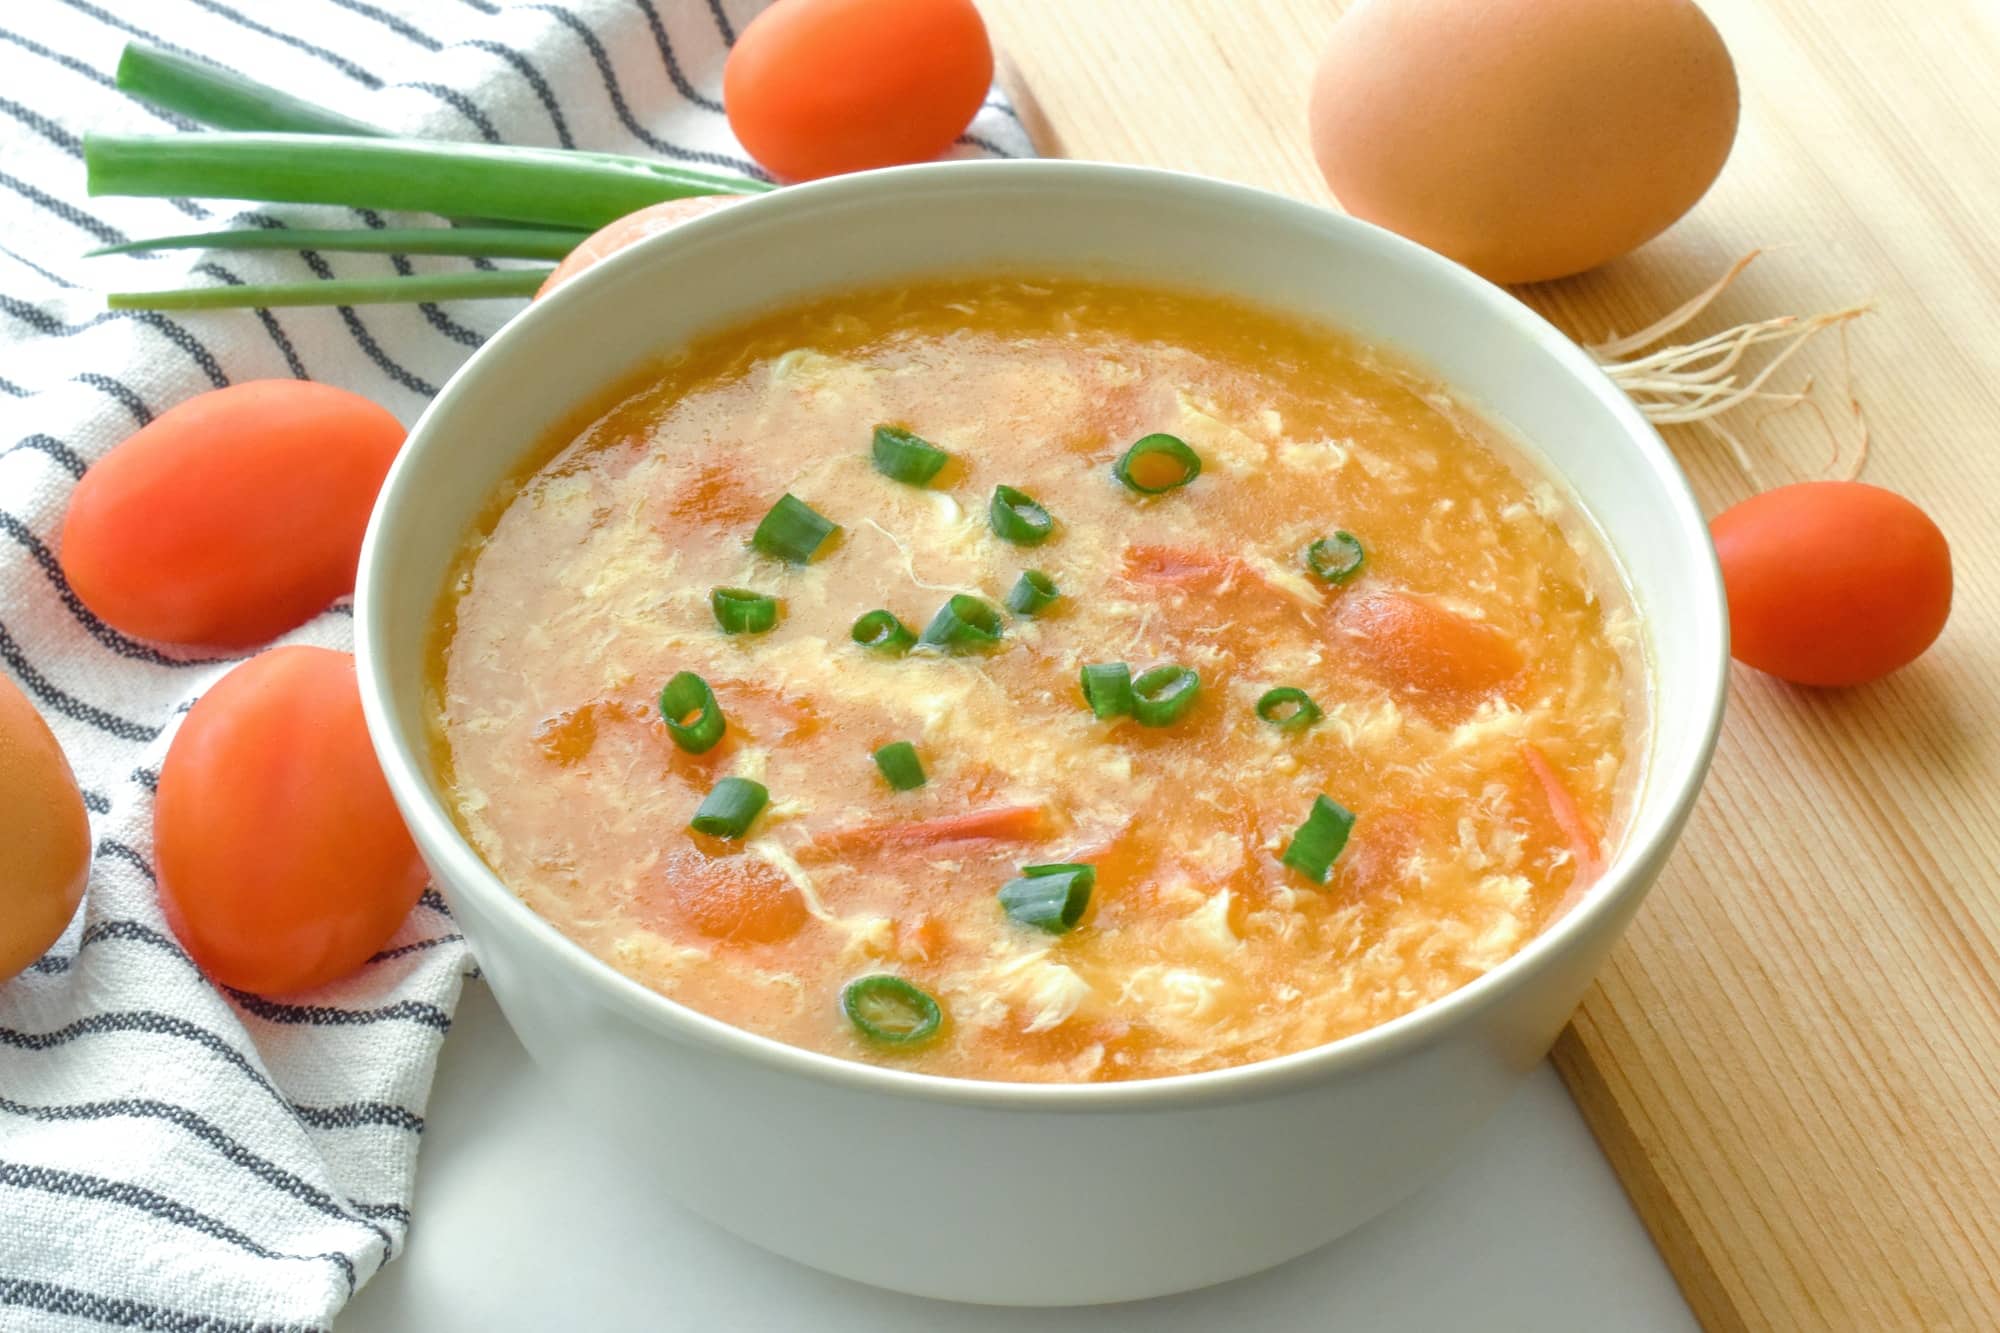 Tomato egg drop soup in a bowl. Traditional Chinese food.